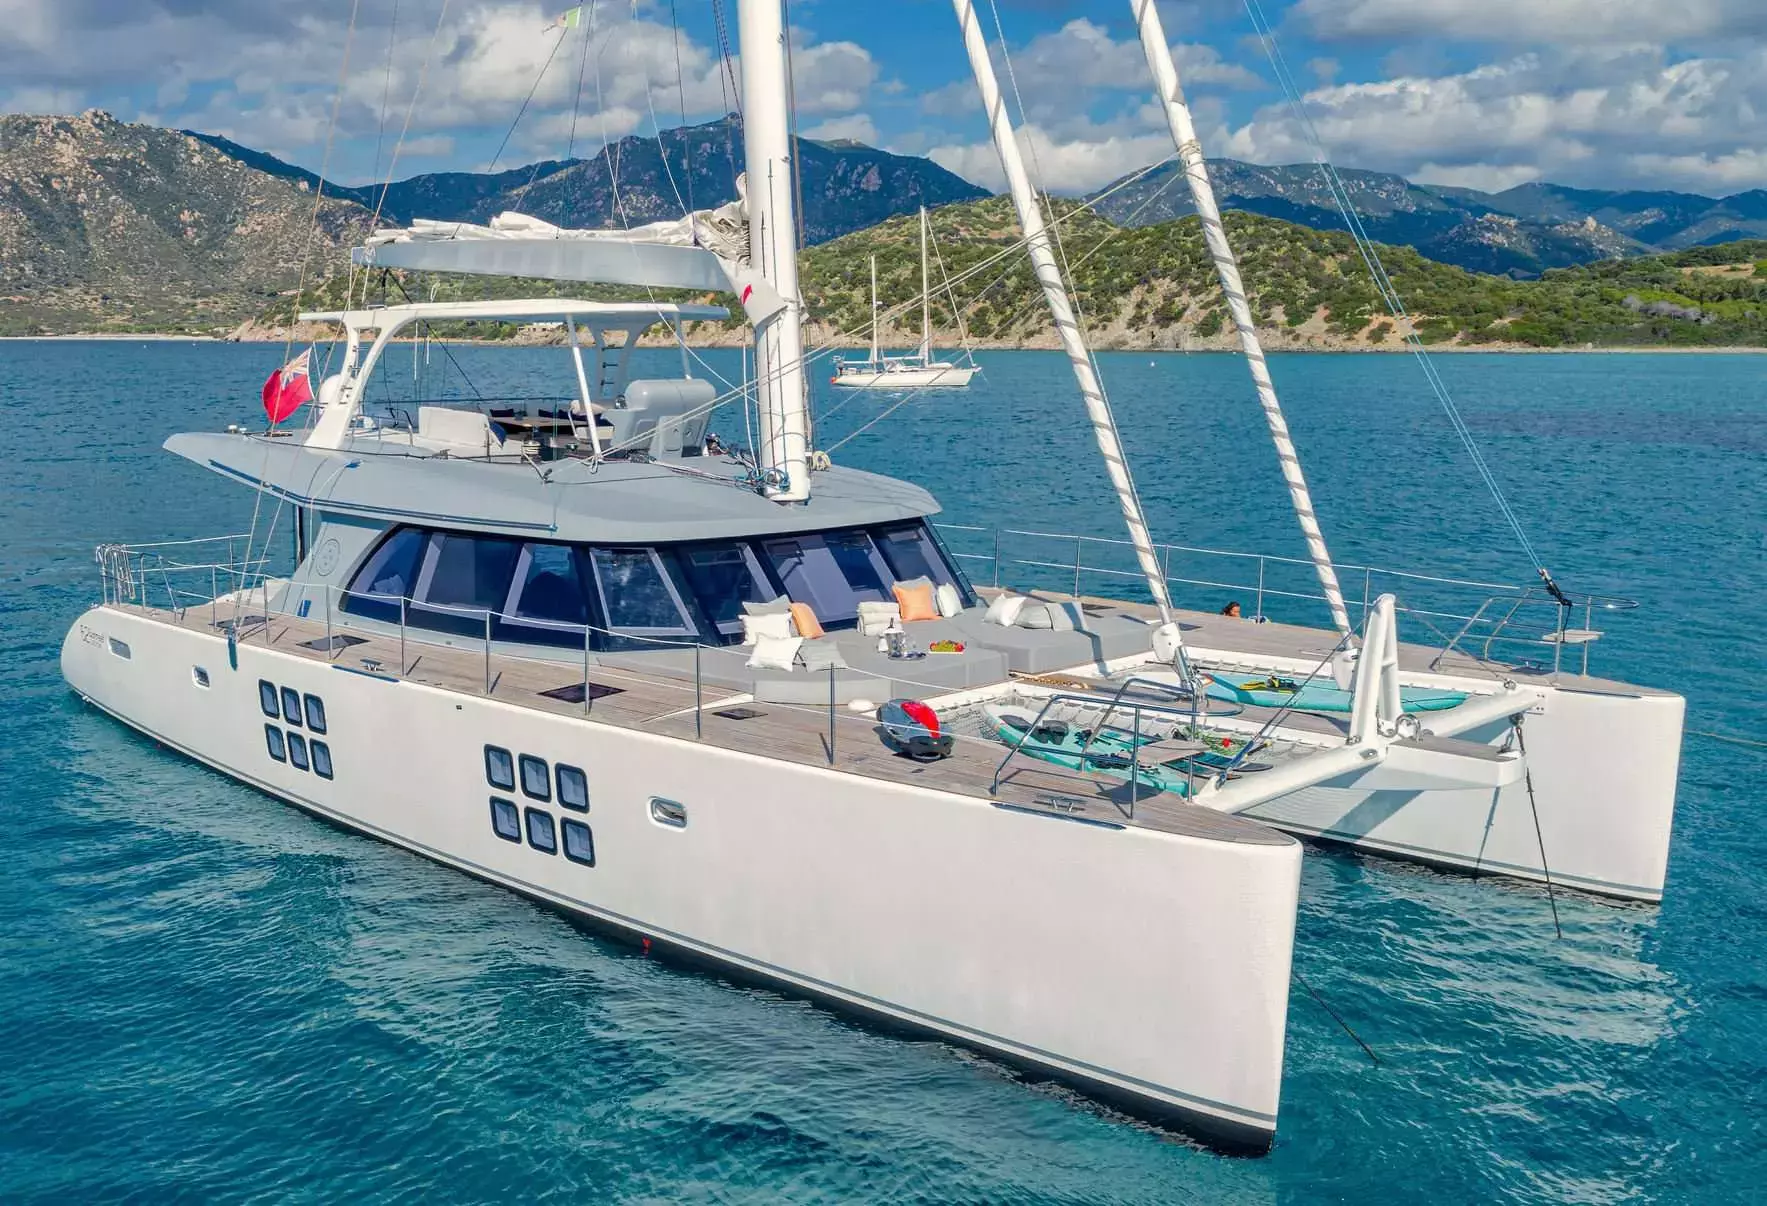 Adea by Sunreef Yachts - Special Offer for a private Sailing Catamaran Rental in Virgin Gorda with a crew